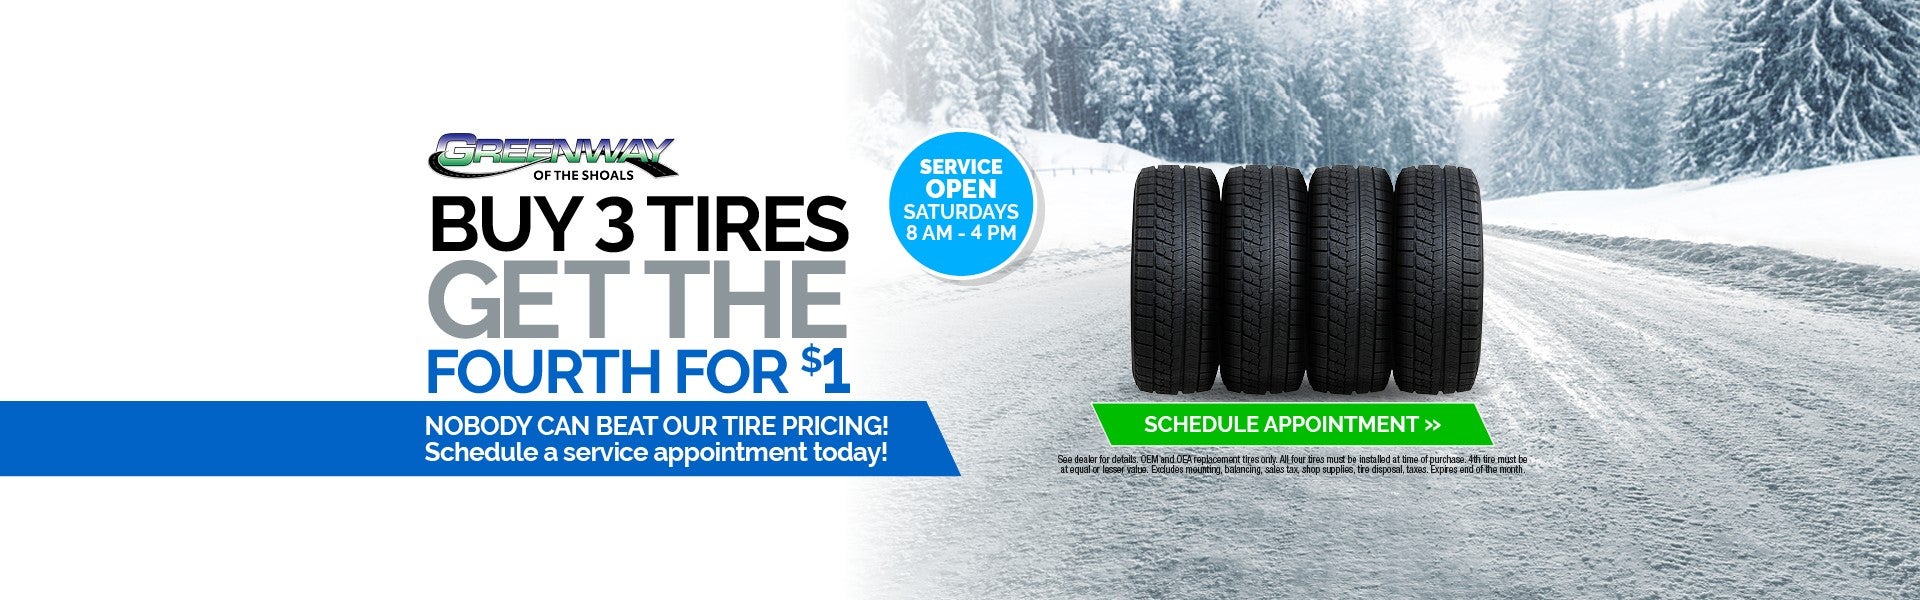 Buy 3 tires get the fourth for $1 at Greenway of the Shoals Group